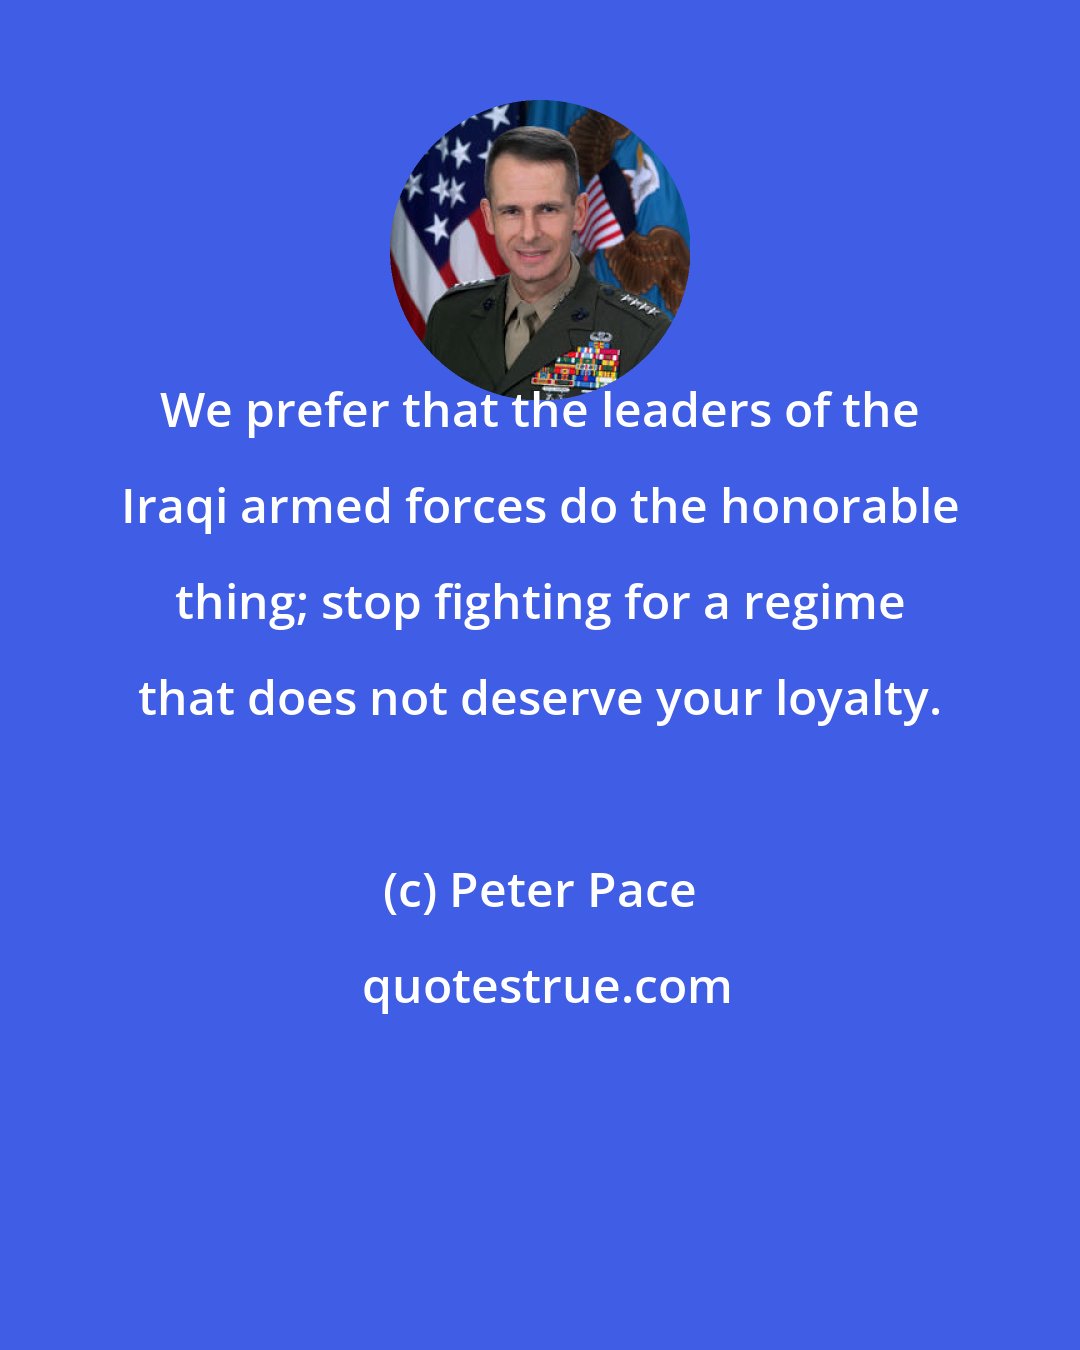 Peter Pace: We prefer that the leaders of the Iraqi armed forces do the honorable thing; stop fighting for a regime that does not deserve your loyalty.